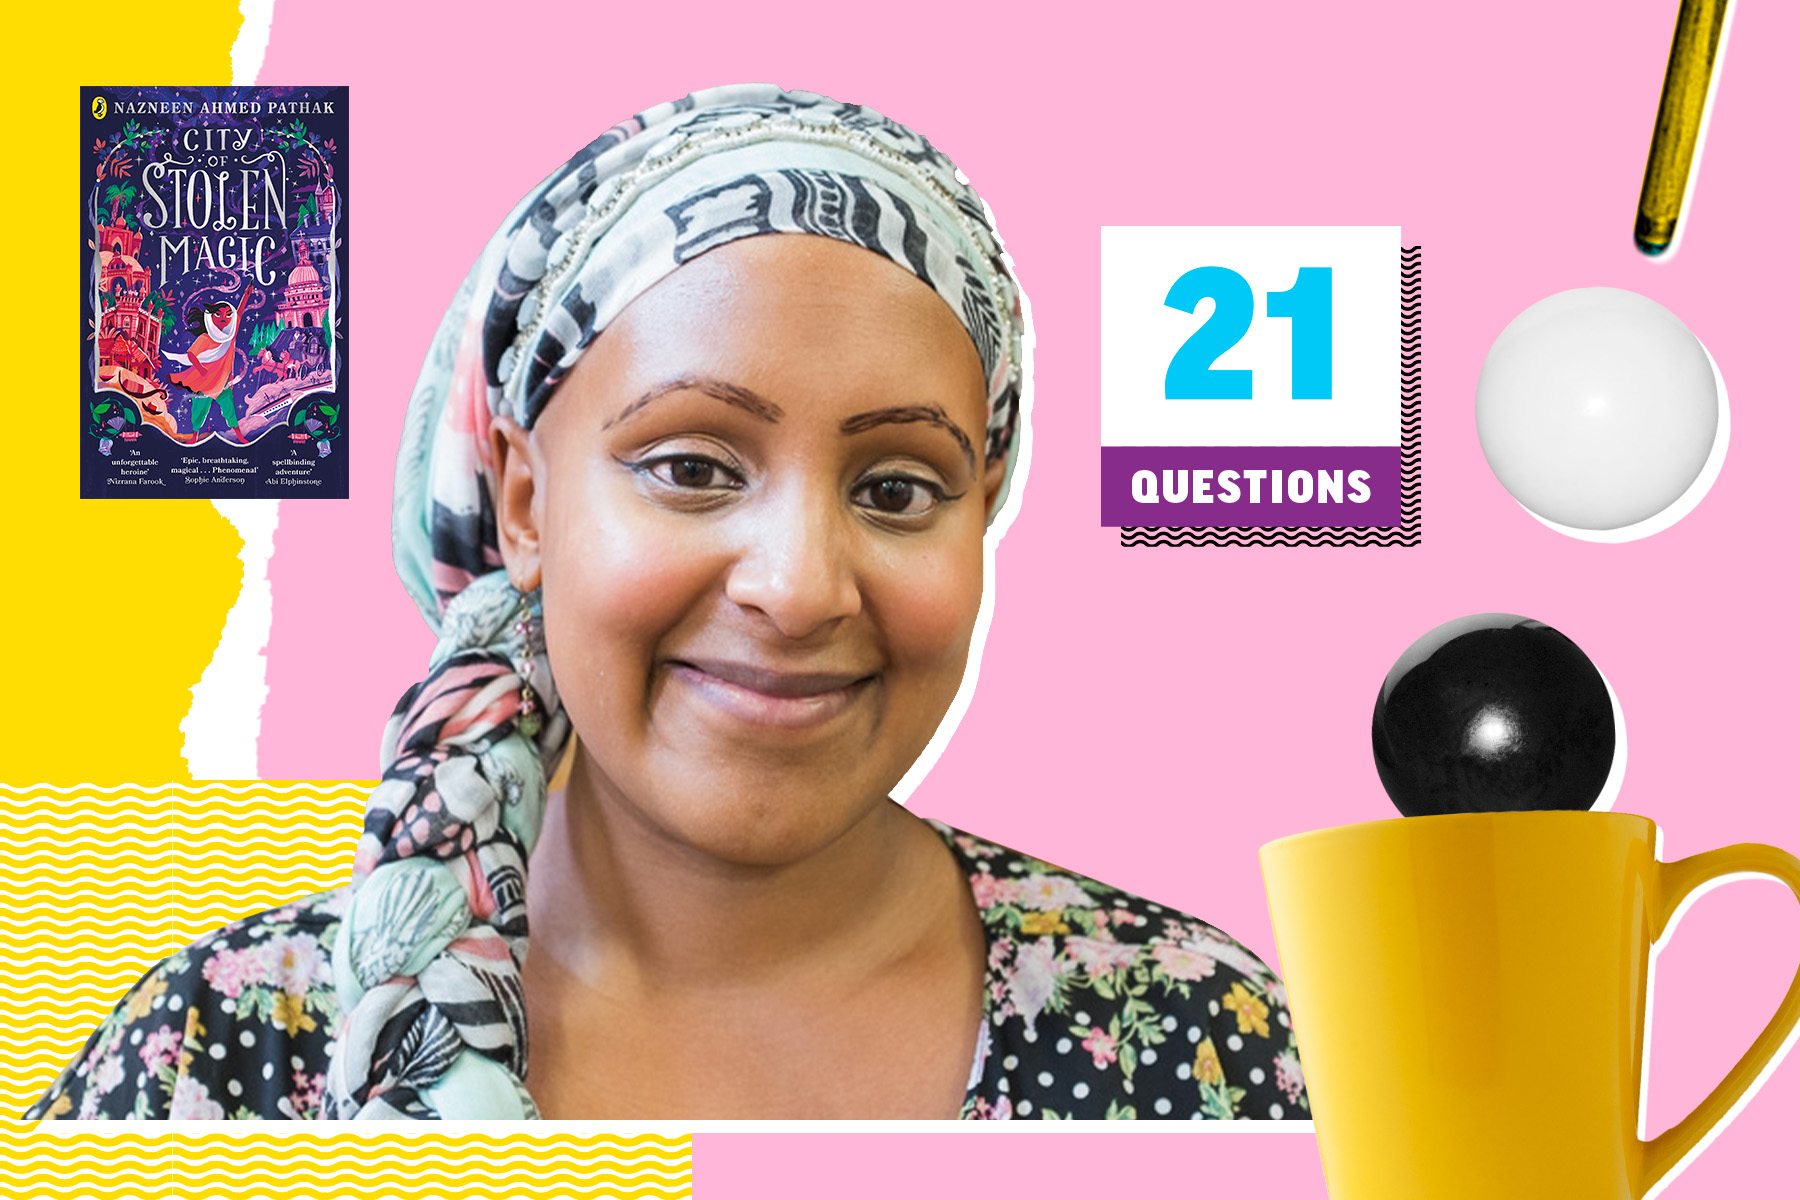 An image with a headshot of author Nazneen Ahmed Pathak. She is on top of a pink and yellow collage style background with bold typography that says '21 Questions'. There is an image of her book City of Stolen Magic, two snooker balls and a cue, and a yellow mug.